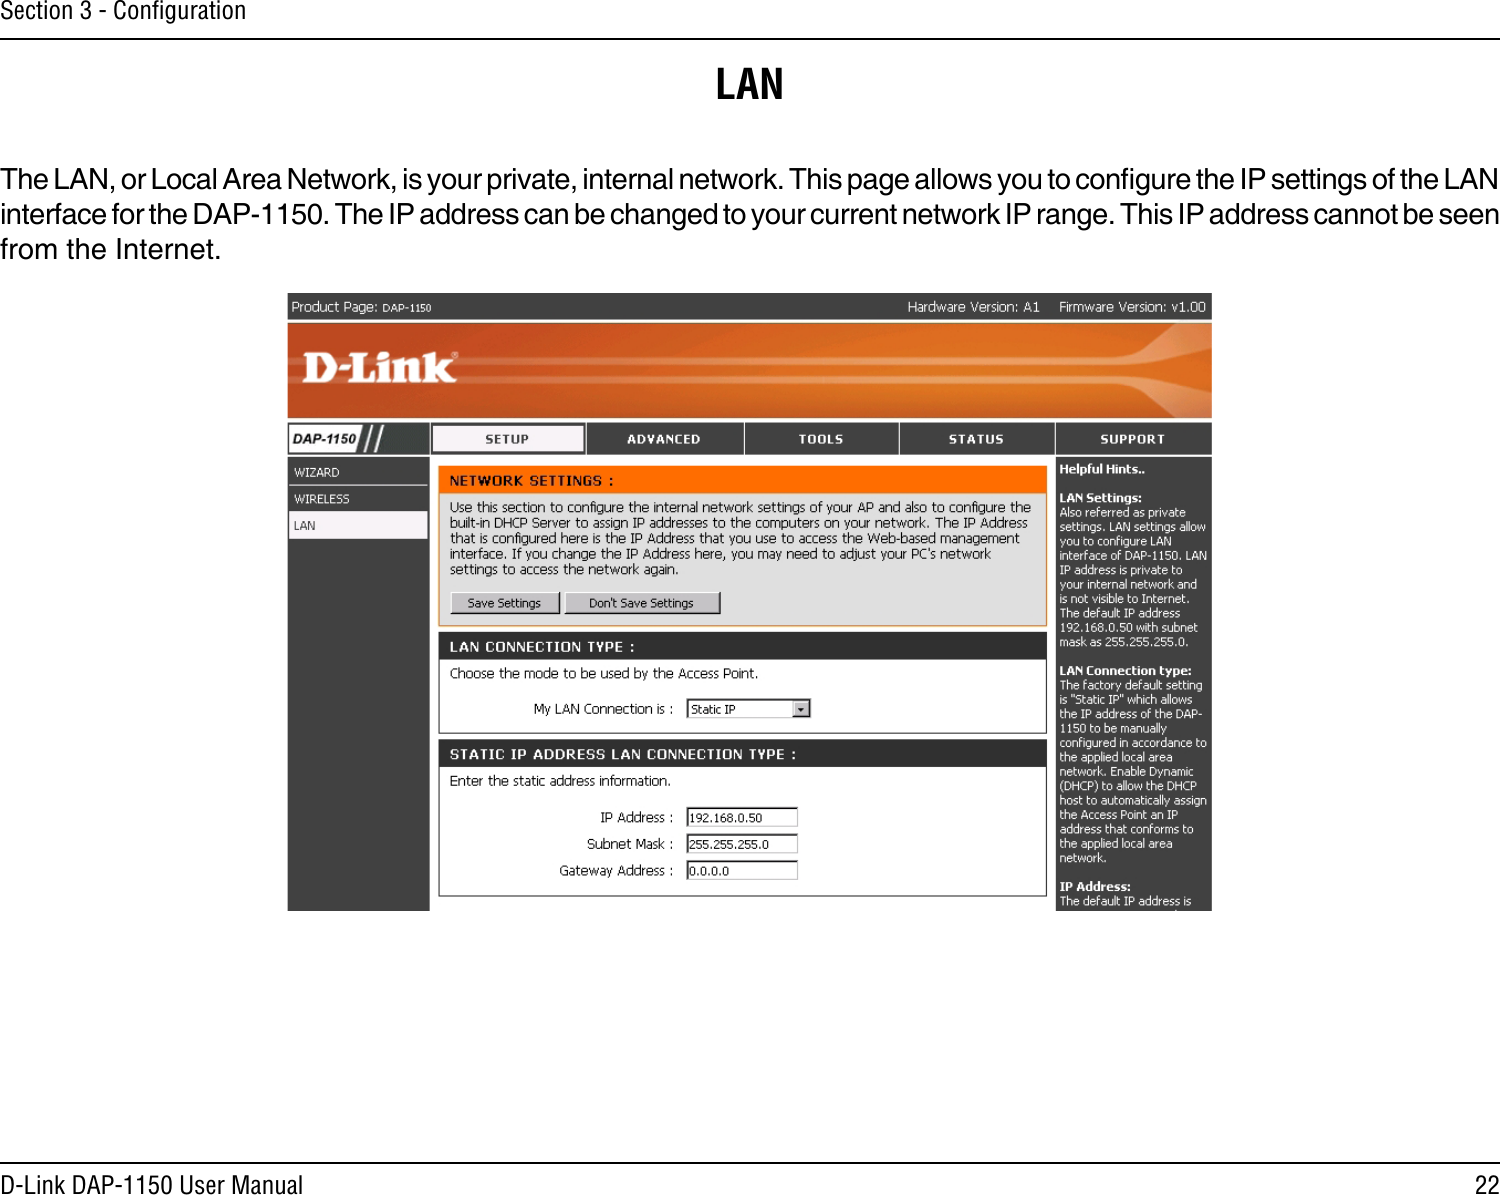 22D-Link DAP-1150 User ManualSection 3 - ConﬁgurationLANThe LAN, or Local Area Network, is your private, internal network. This page allows you to congure the IP settings of the LAN interface for the DAP-1150. The IP address can be changed to your current network IP range. This IP address cannot be seen from the Internet.